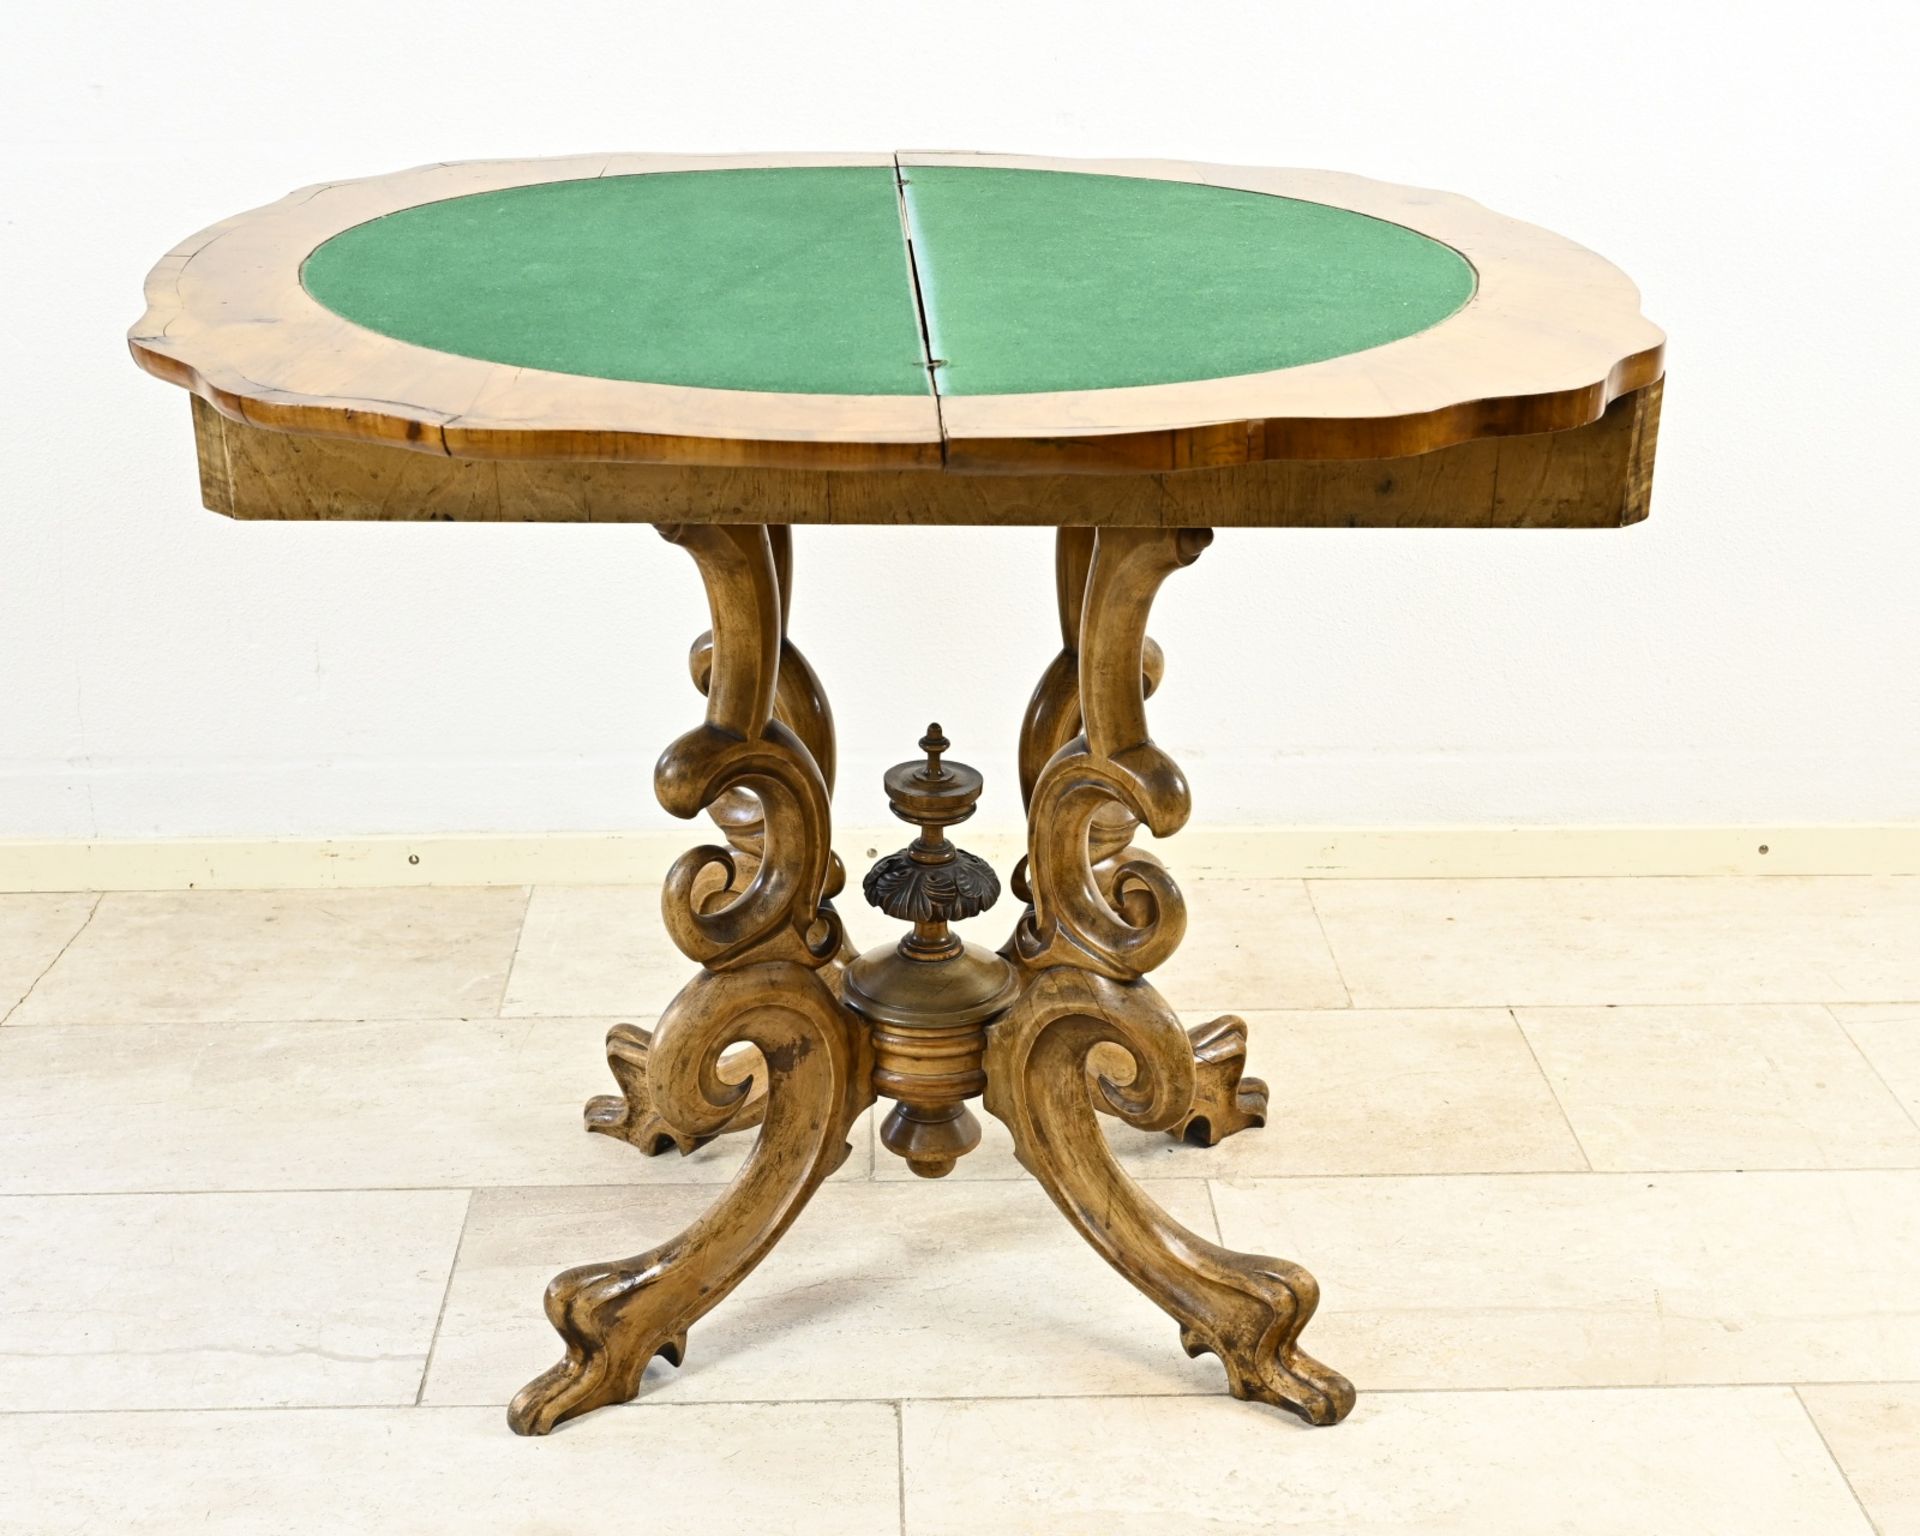 Willem III gaming table (notes) - Image 3 of 3